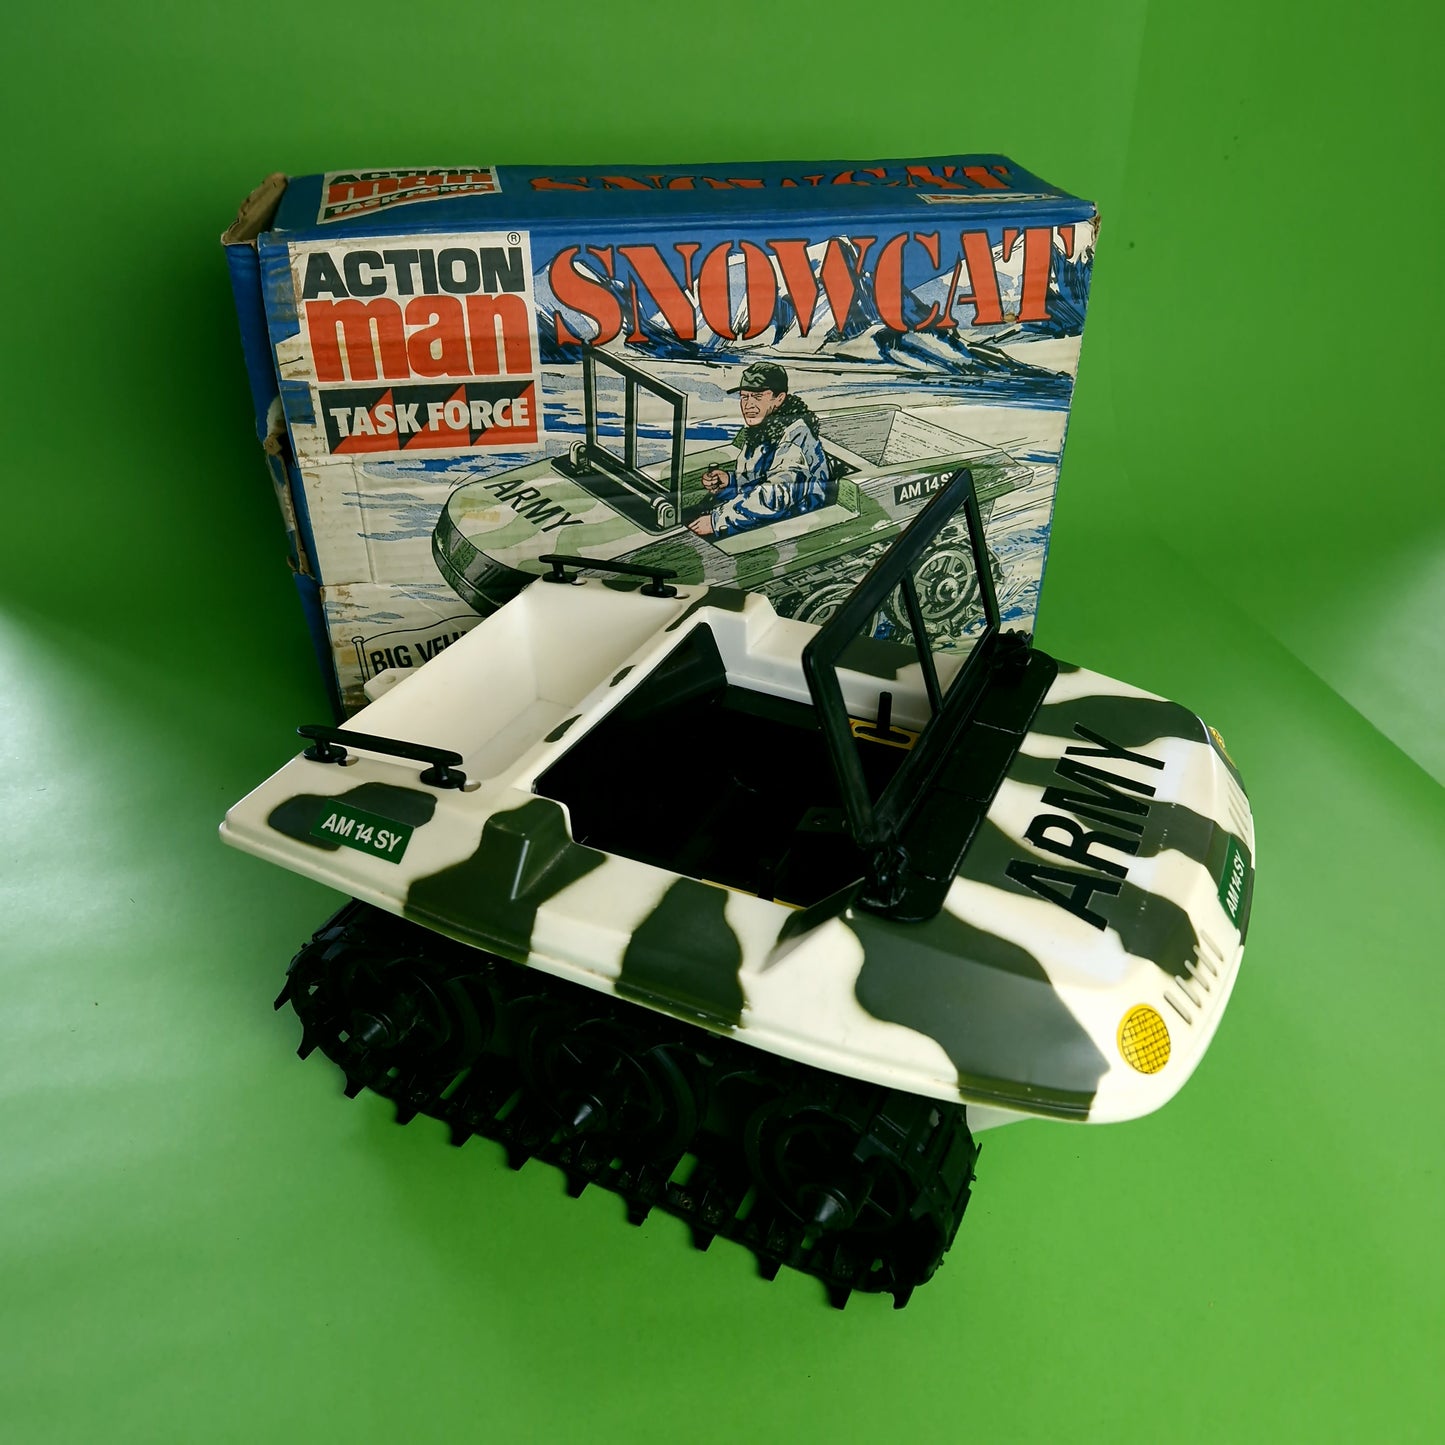 ACTION MAN ☆ Task Force SNOWCAT Vehicle BOXED 70's ☆ Vintage PALITOY